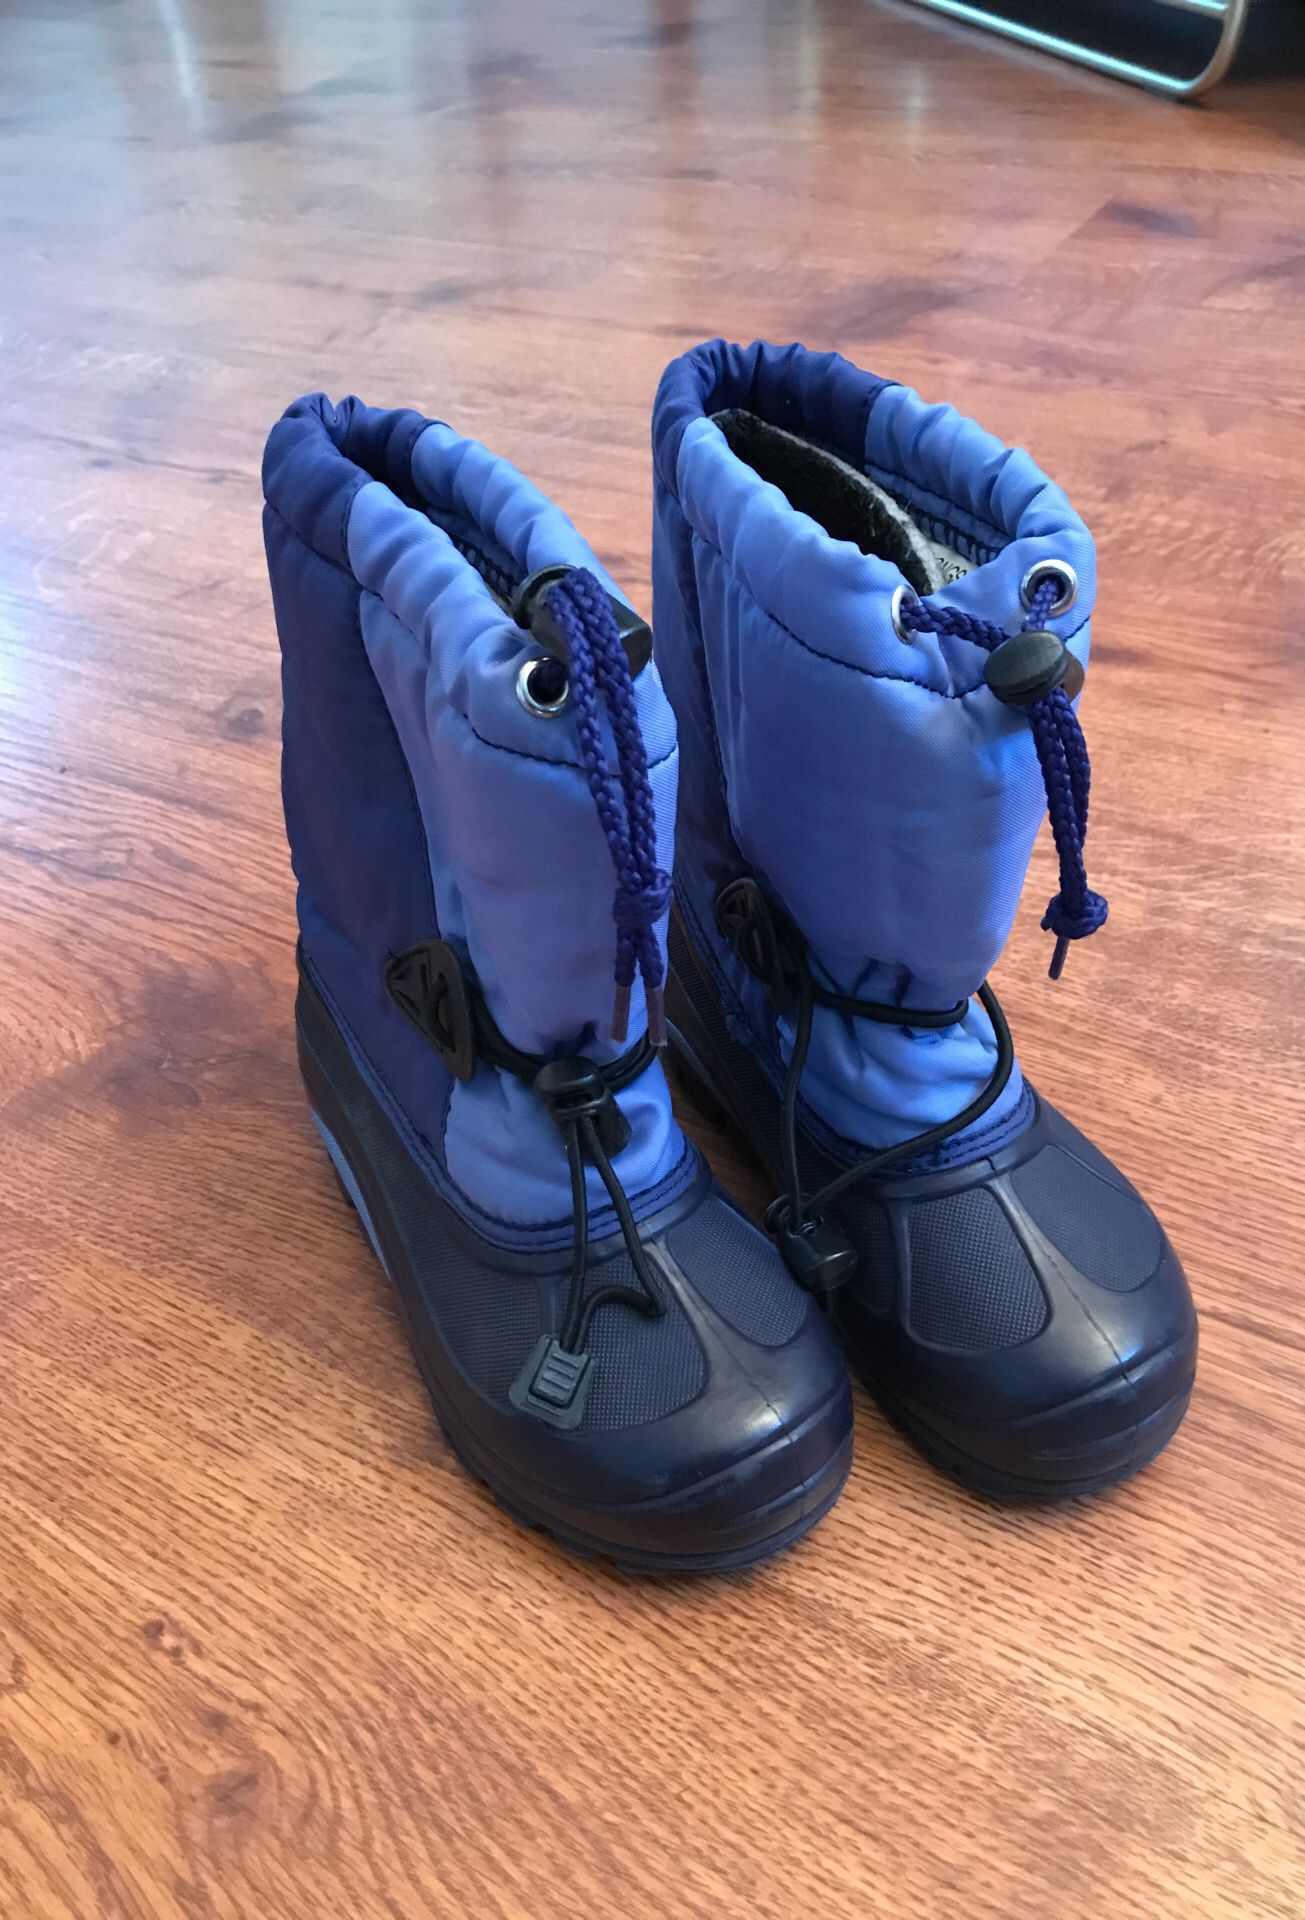 Snow boots size 12